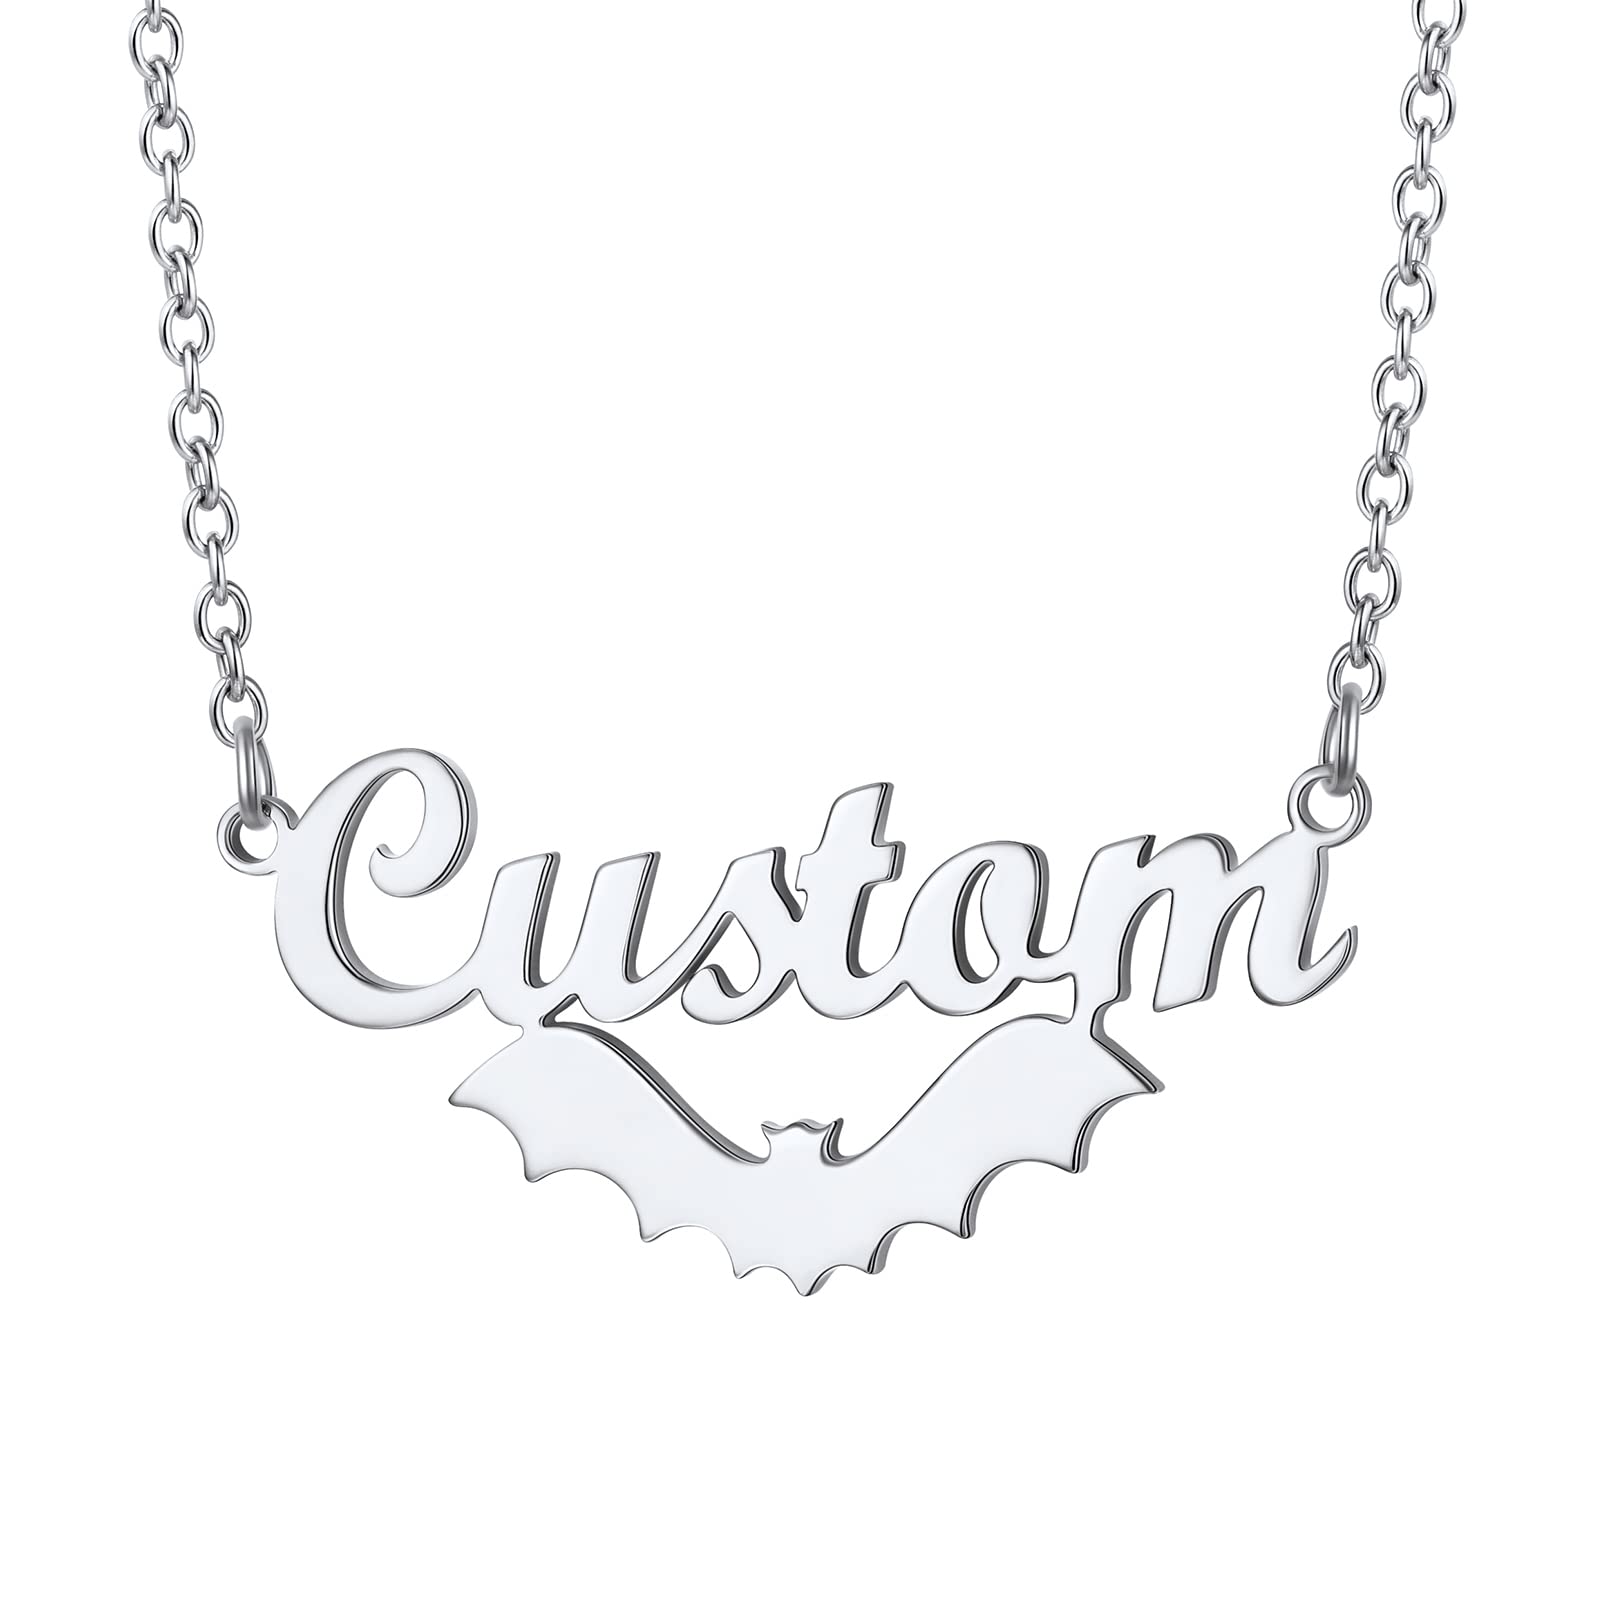 Custom4U Bat Name Necklace Personalized Custom Nameplate Necklaces Stainless Steel/925 Sterling Silver, Customized Gothic Jewelry Gifts for Women Men Halloween Birthday (Gift Box)